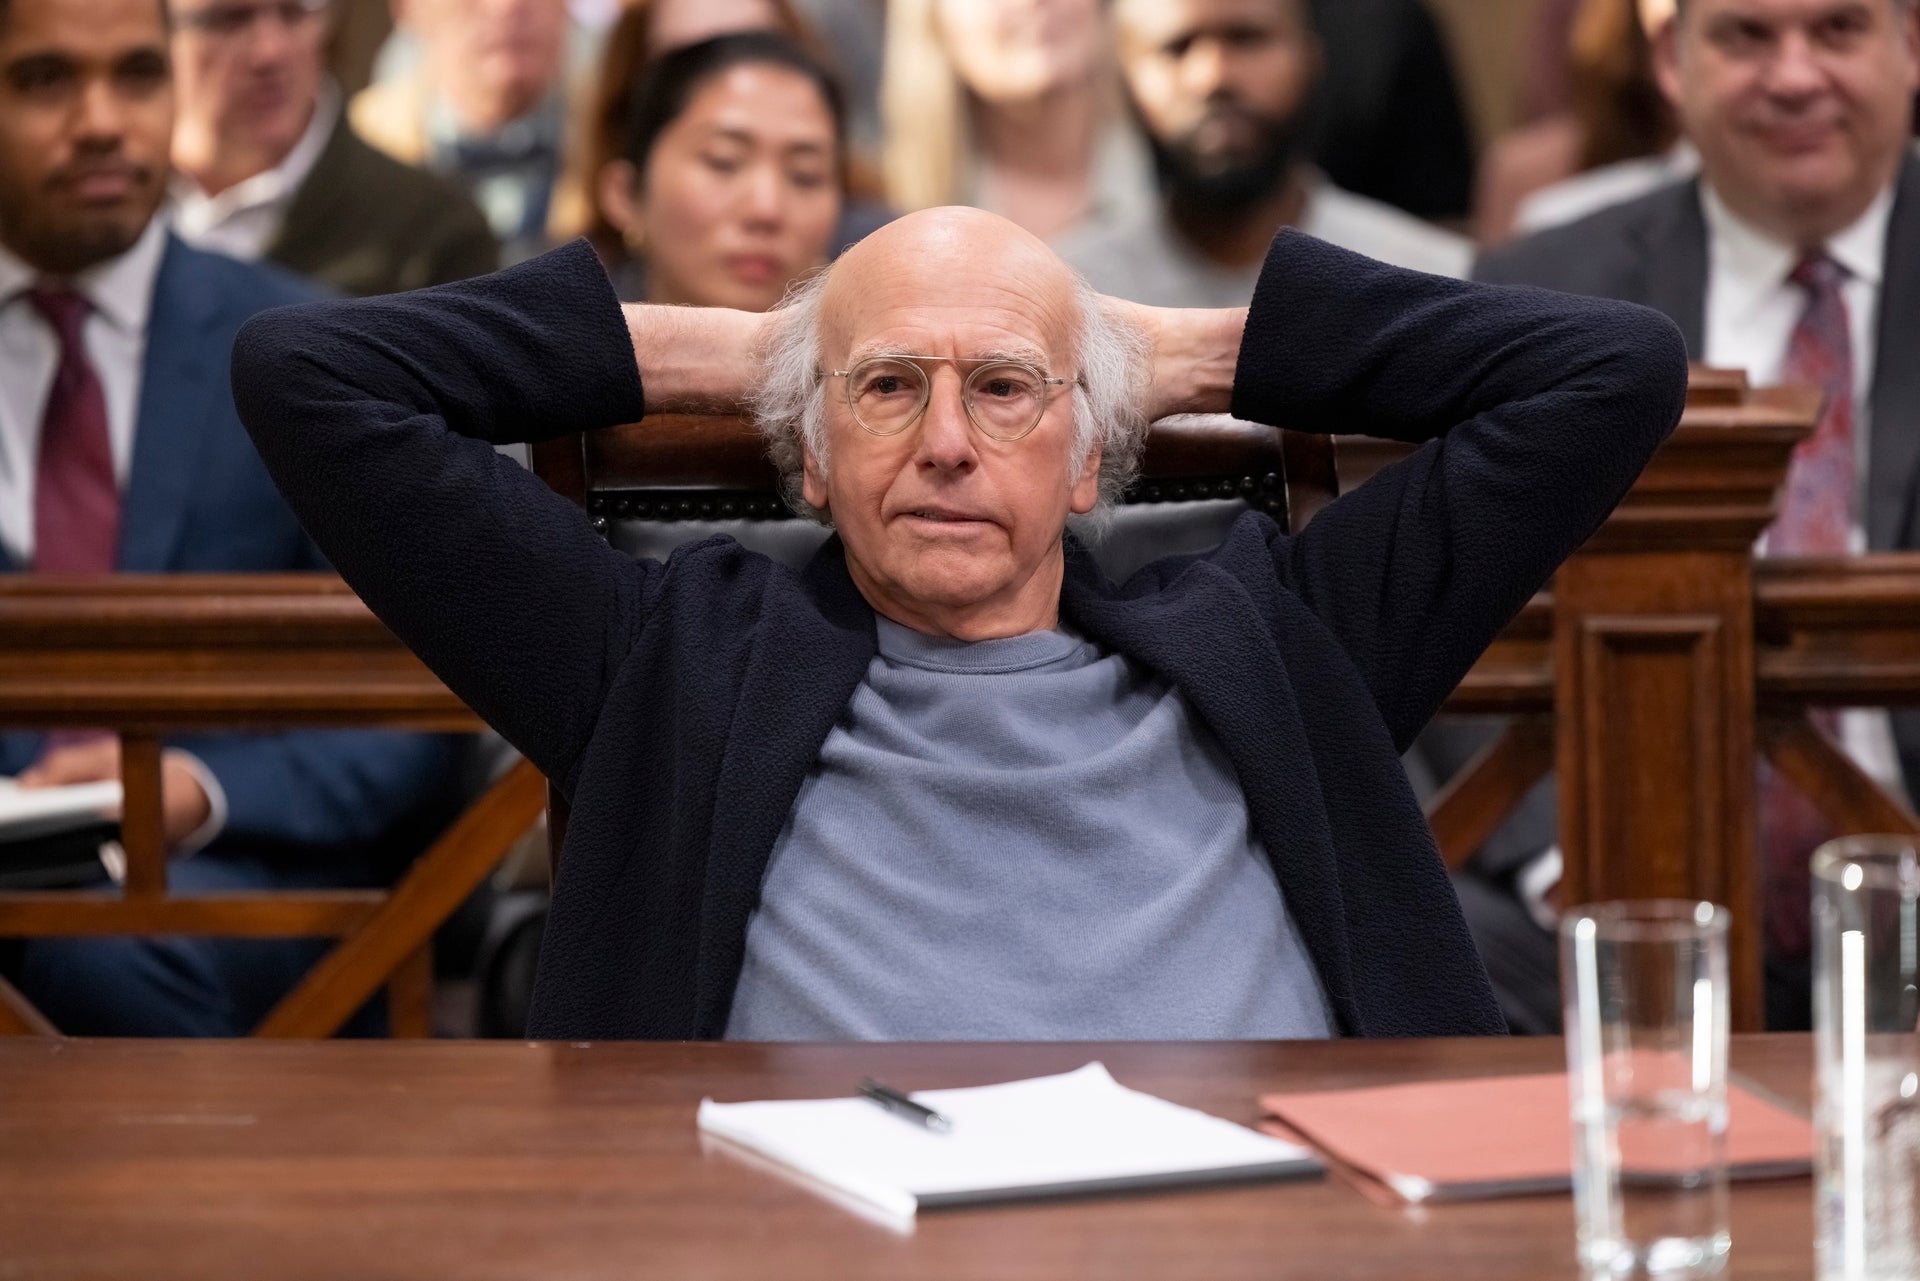 A still shows Larry David leaning back behind the defendant's table, his hands folded behind his head, looking defiant.